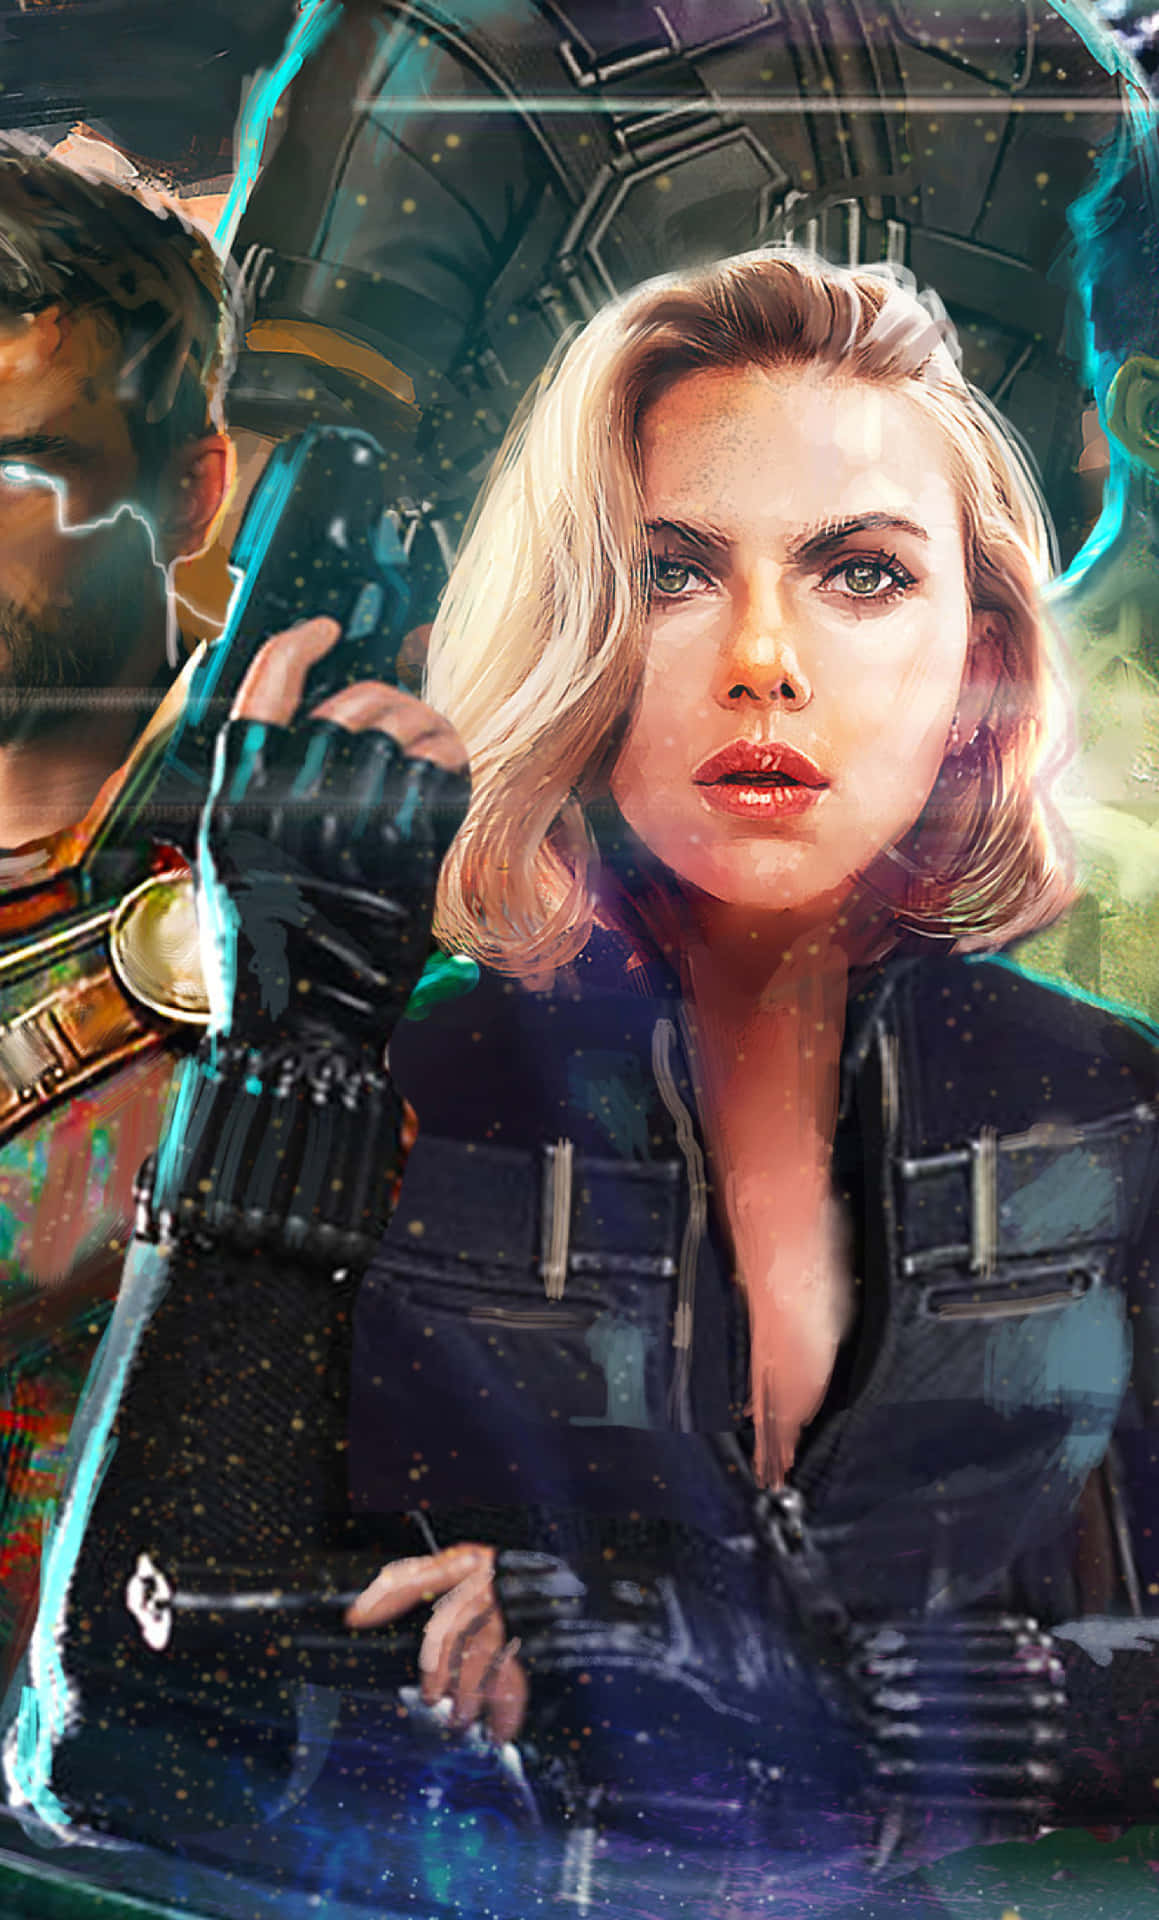 Protect yourself from potential threats with Black Widow's Iphone Wallpaper